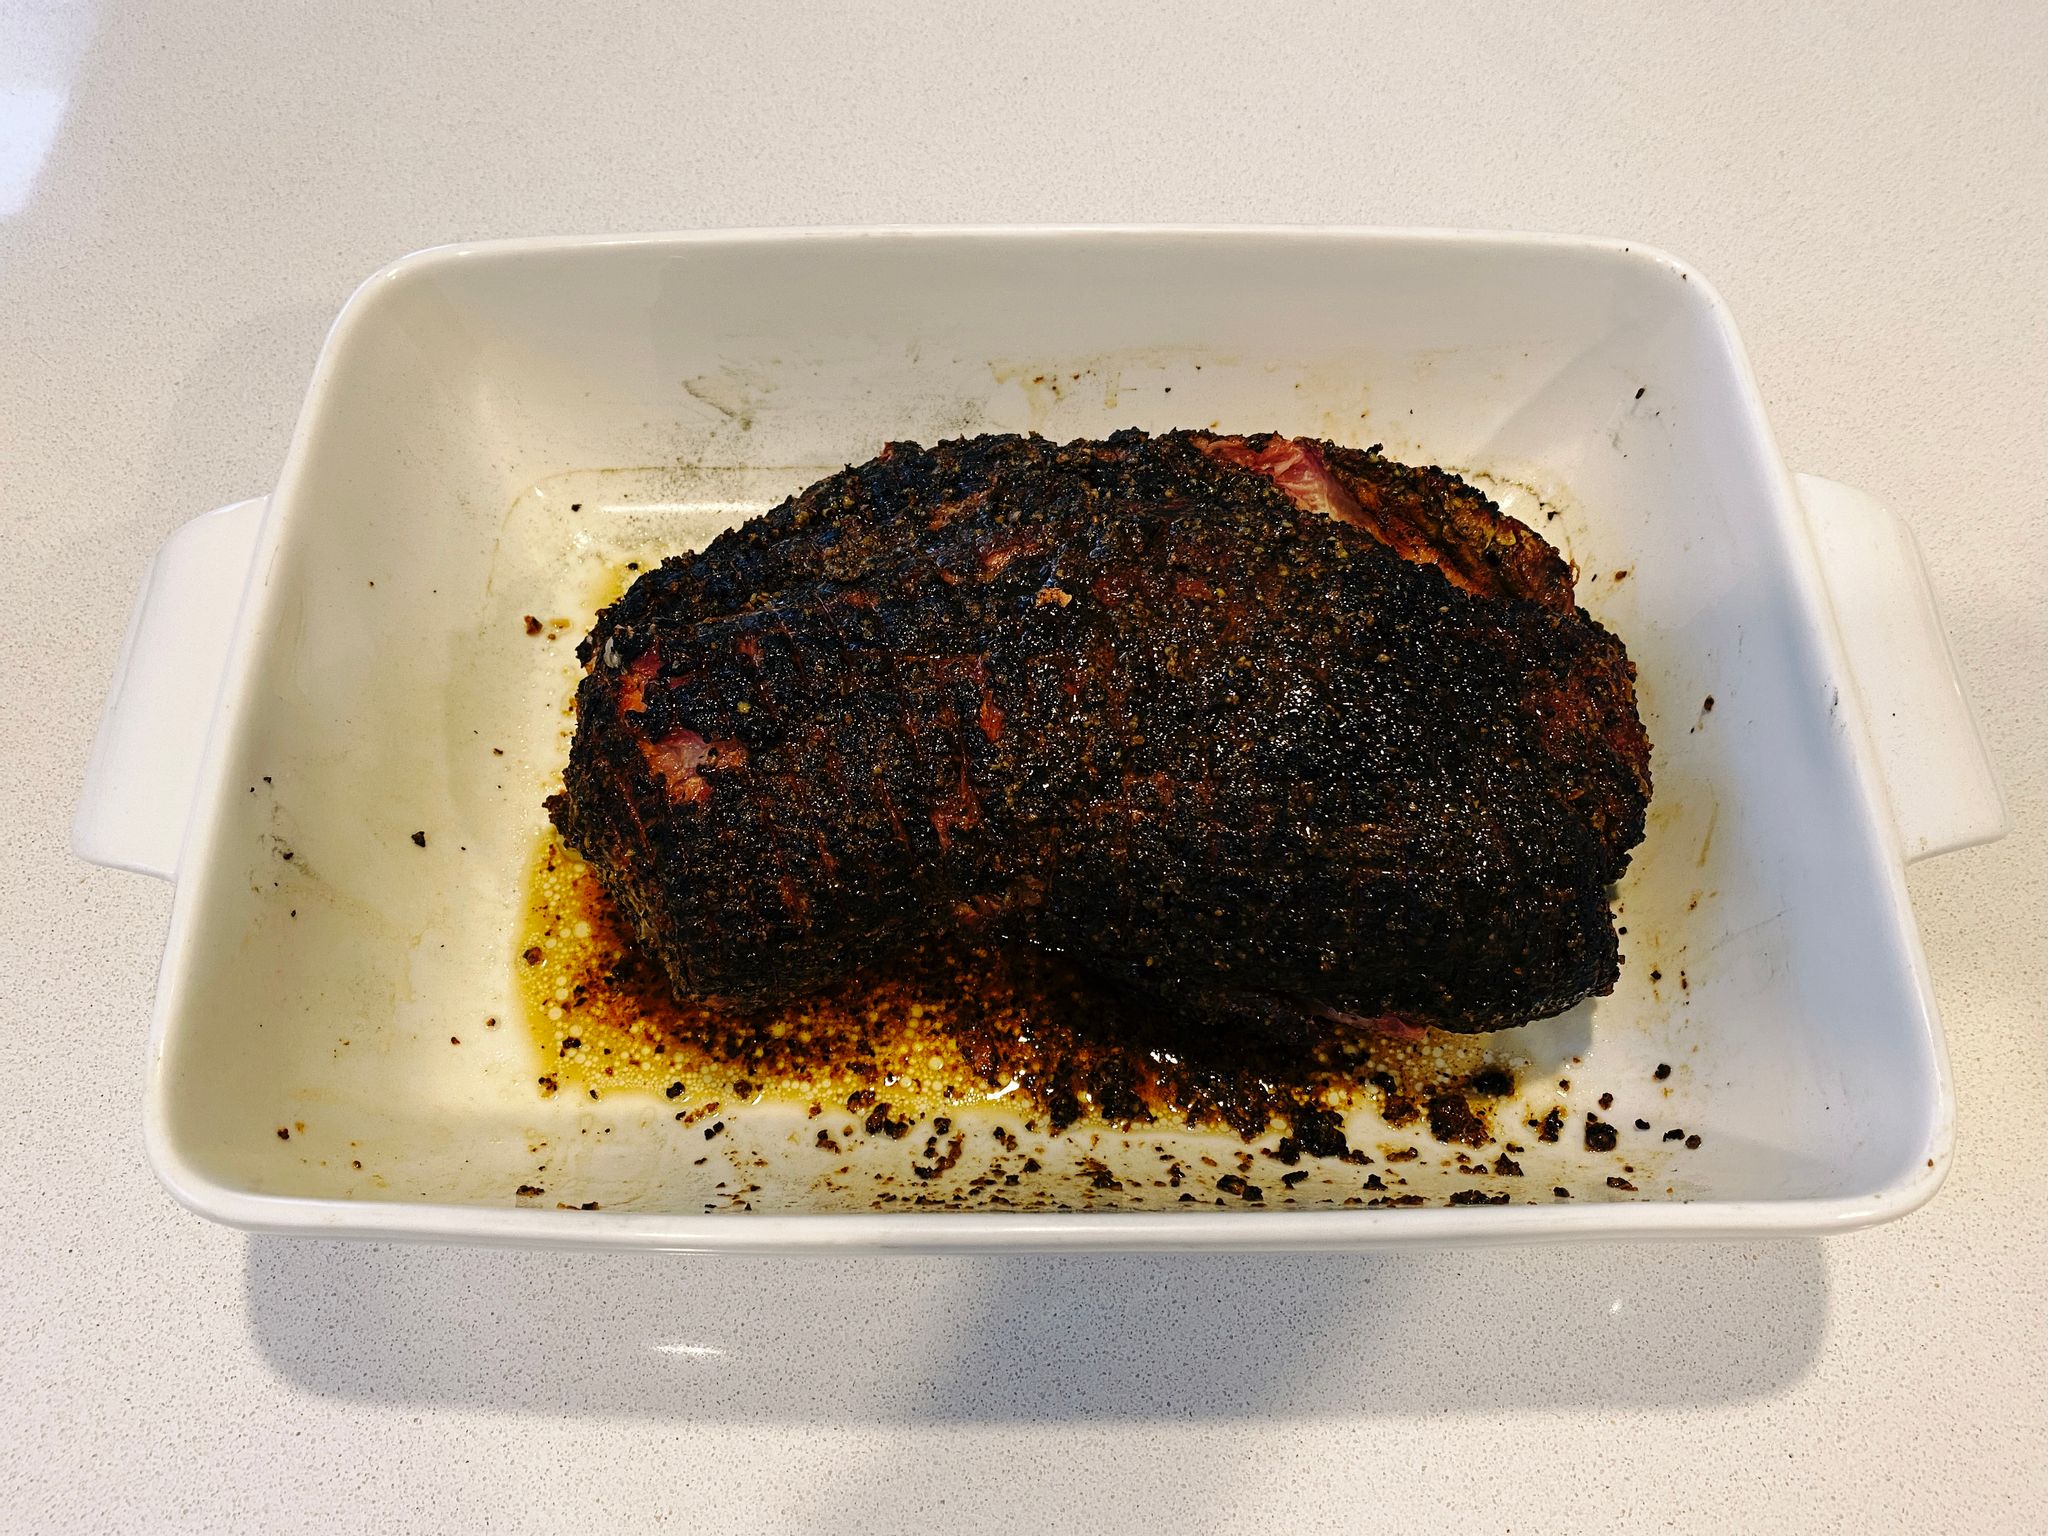 A photo of a fully cooked pork shoulder sitting in a big white dish. It's dark and has a nice crust on the outside.